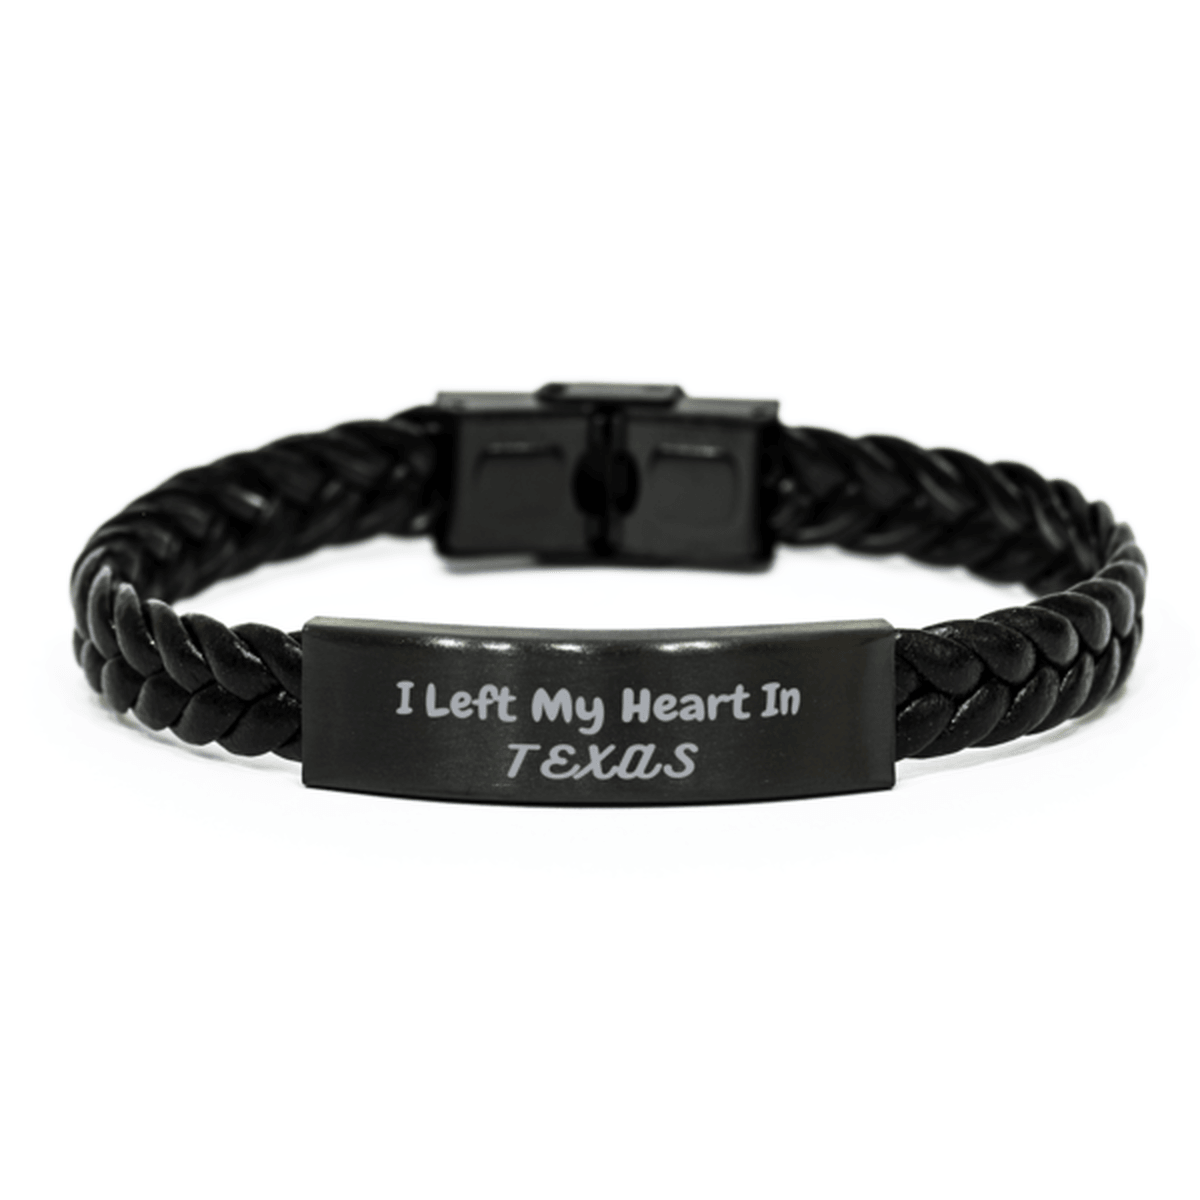 I Left My Heart In Texas Gifts, Meaningful Texas State for Friends, Men, Women. Braided Leather Bracelet for Texas People - Mallard Moon Gift Shop